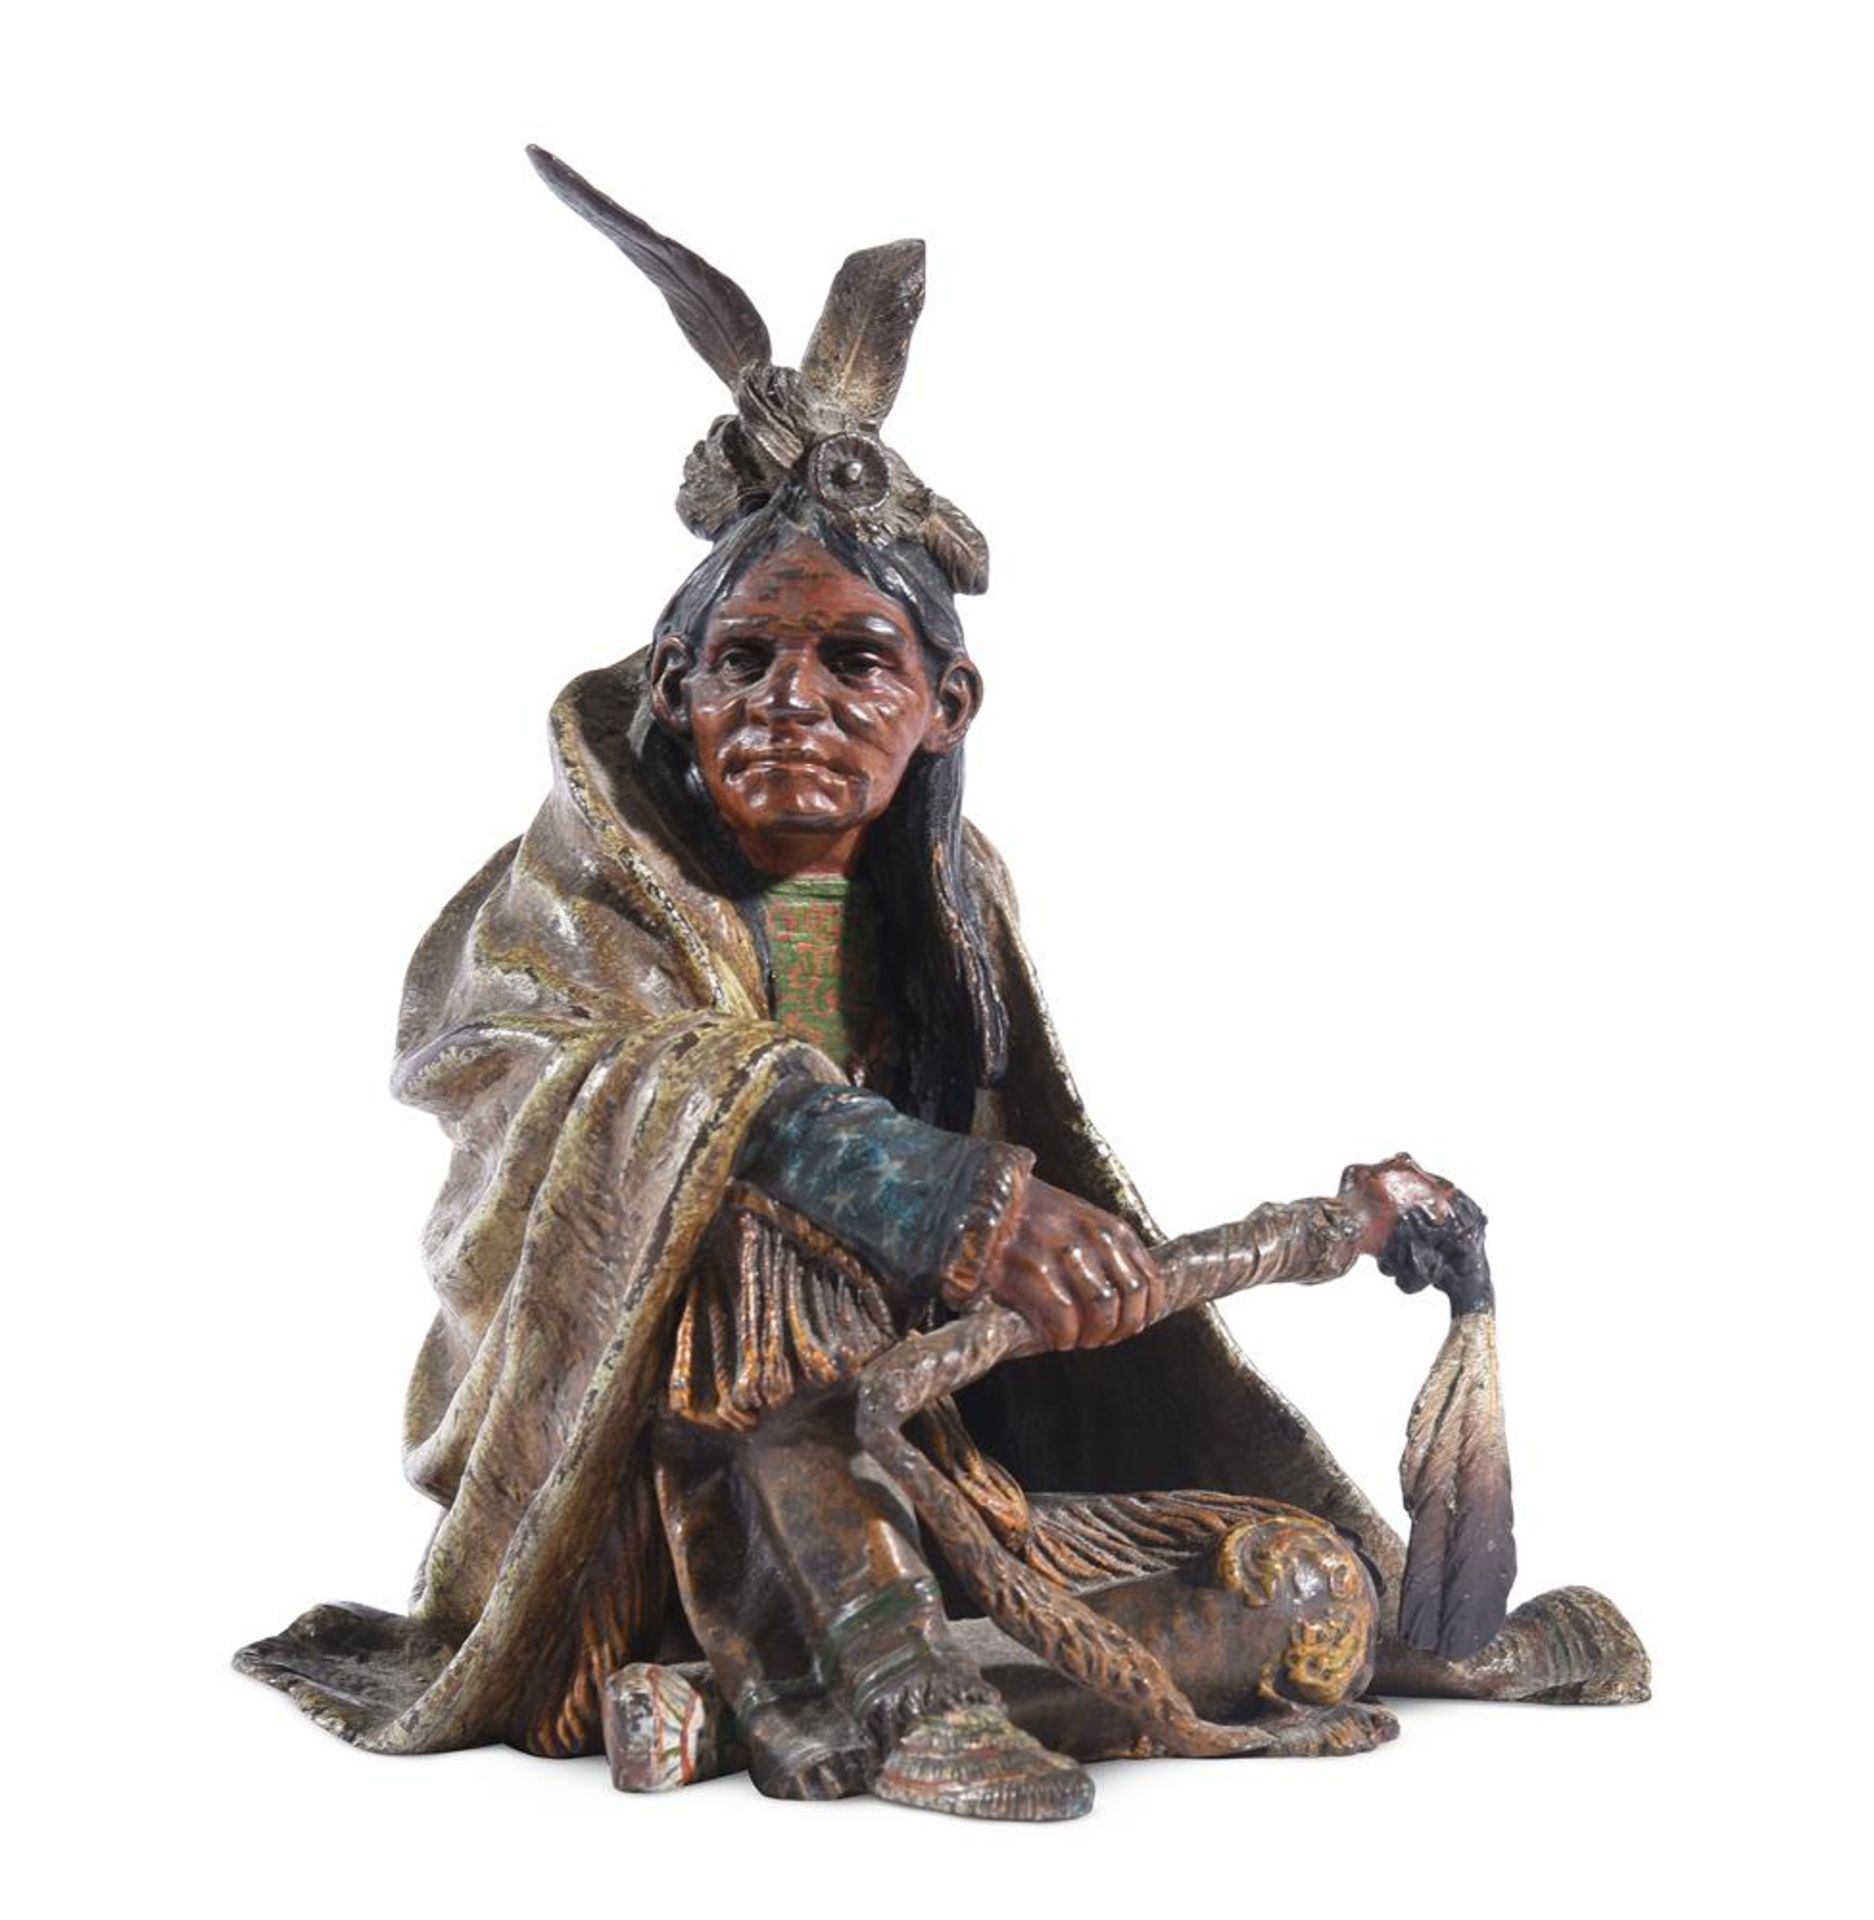 AN AUSTRIAN COLD PAINTED FIGURE OF A NATIVE AMERICAN MAN, EARLY 20TH CENTURY